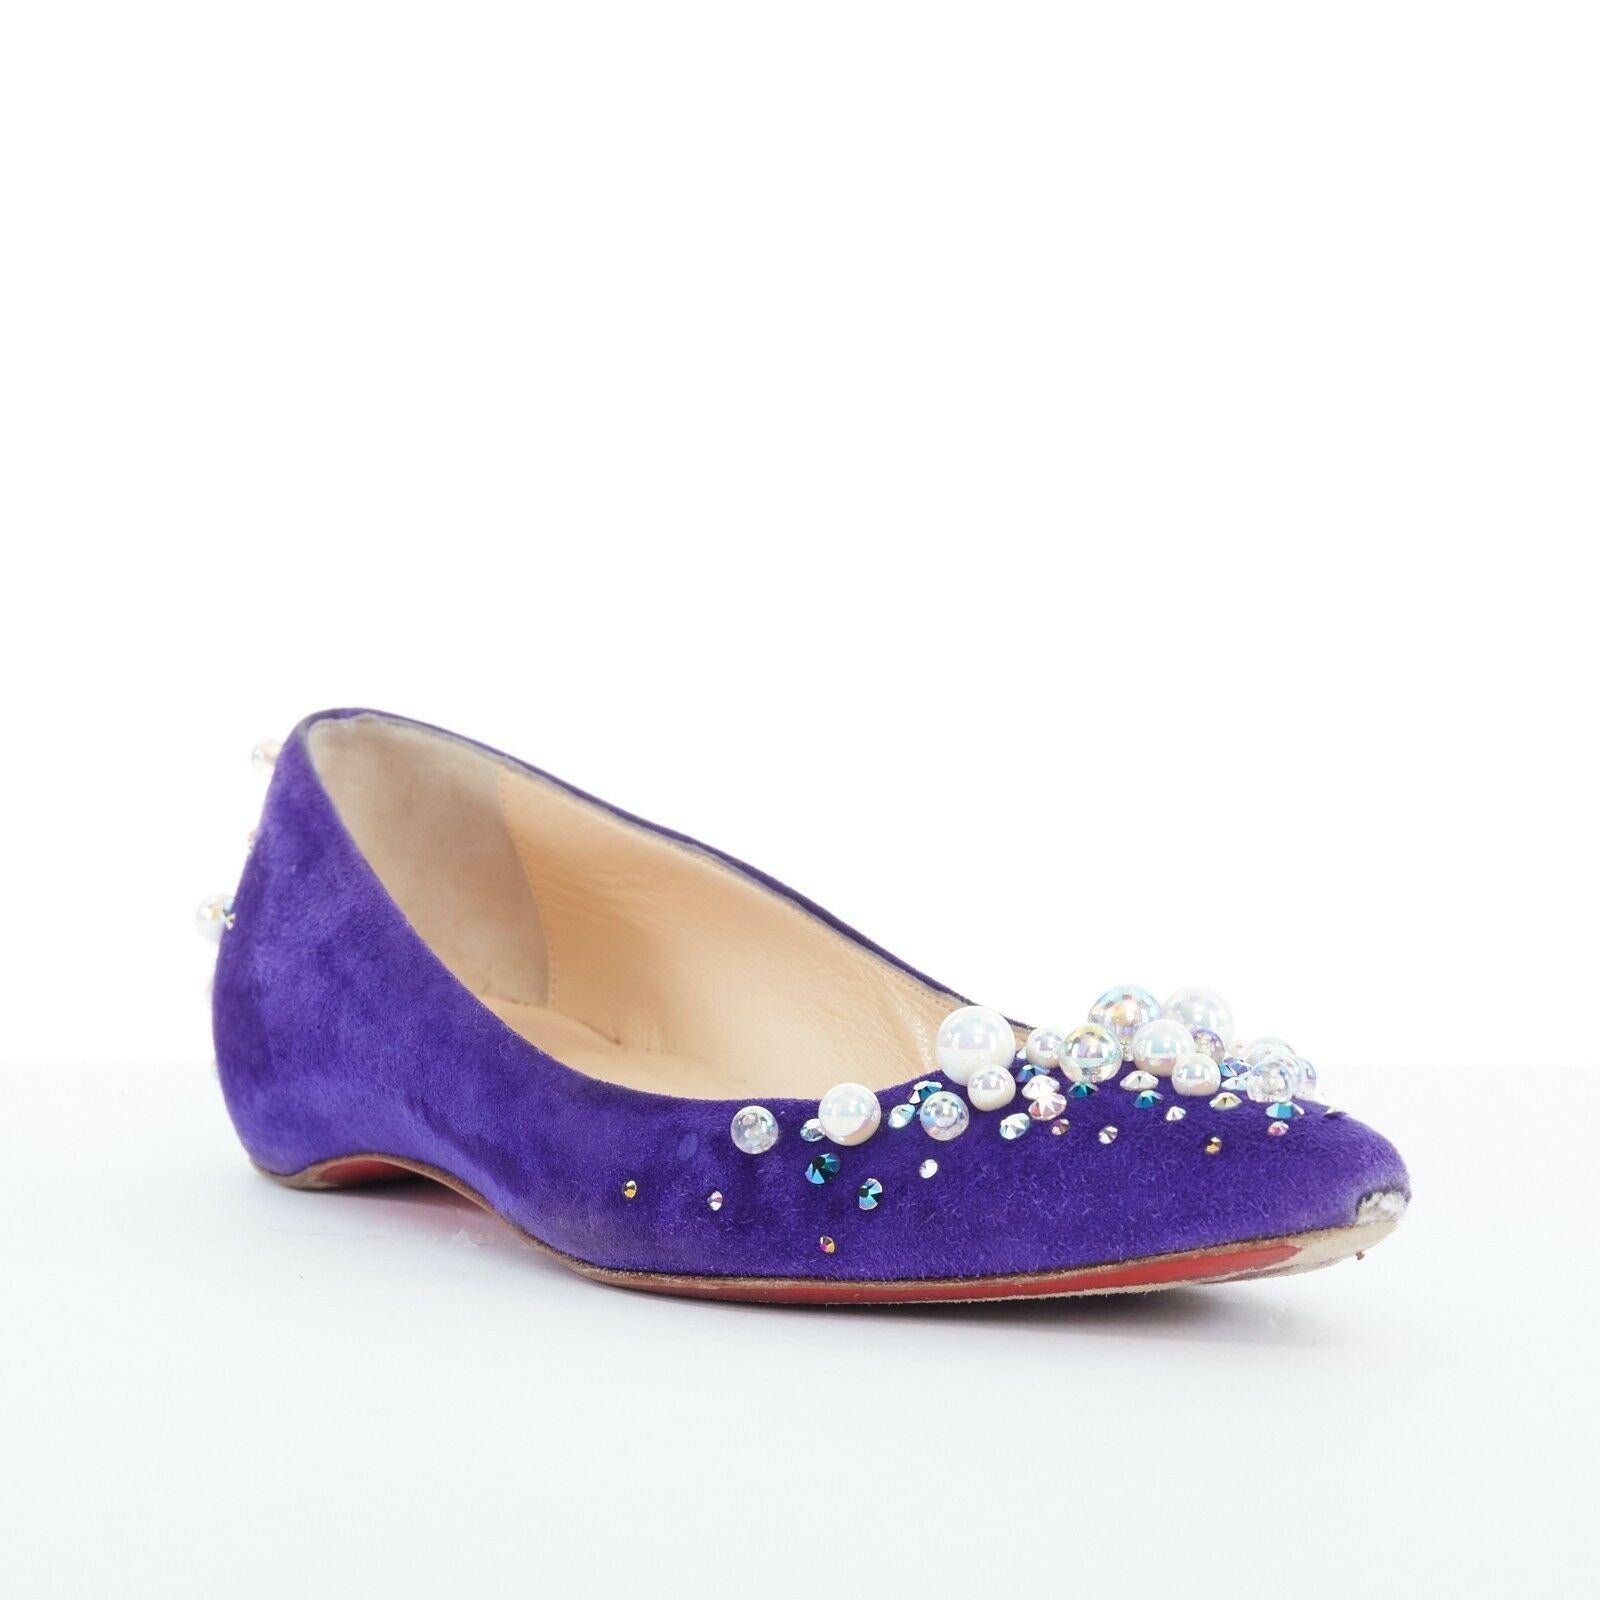 CHRISTIAN LOUBOUTIN Candidate blue suede pearl crystal ballerina flats EU35.5
CHRISTIAN LOUBOUTIN
Candidate ballerina flats. 
Cobalt blue suede upper. Iridescent pearl and jewel embellished upper on toe and at heel. 
Pointed toe. Tonal stitching.